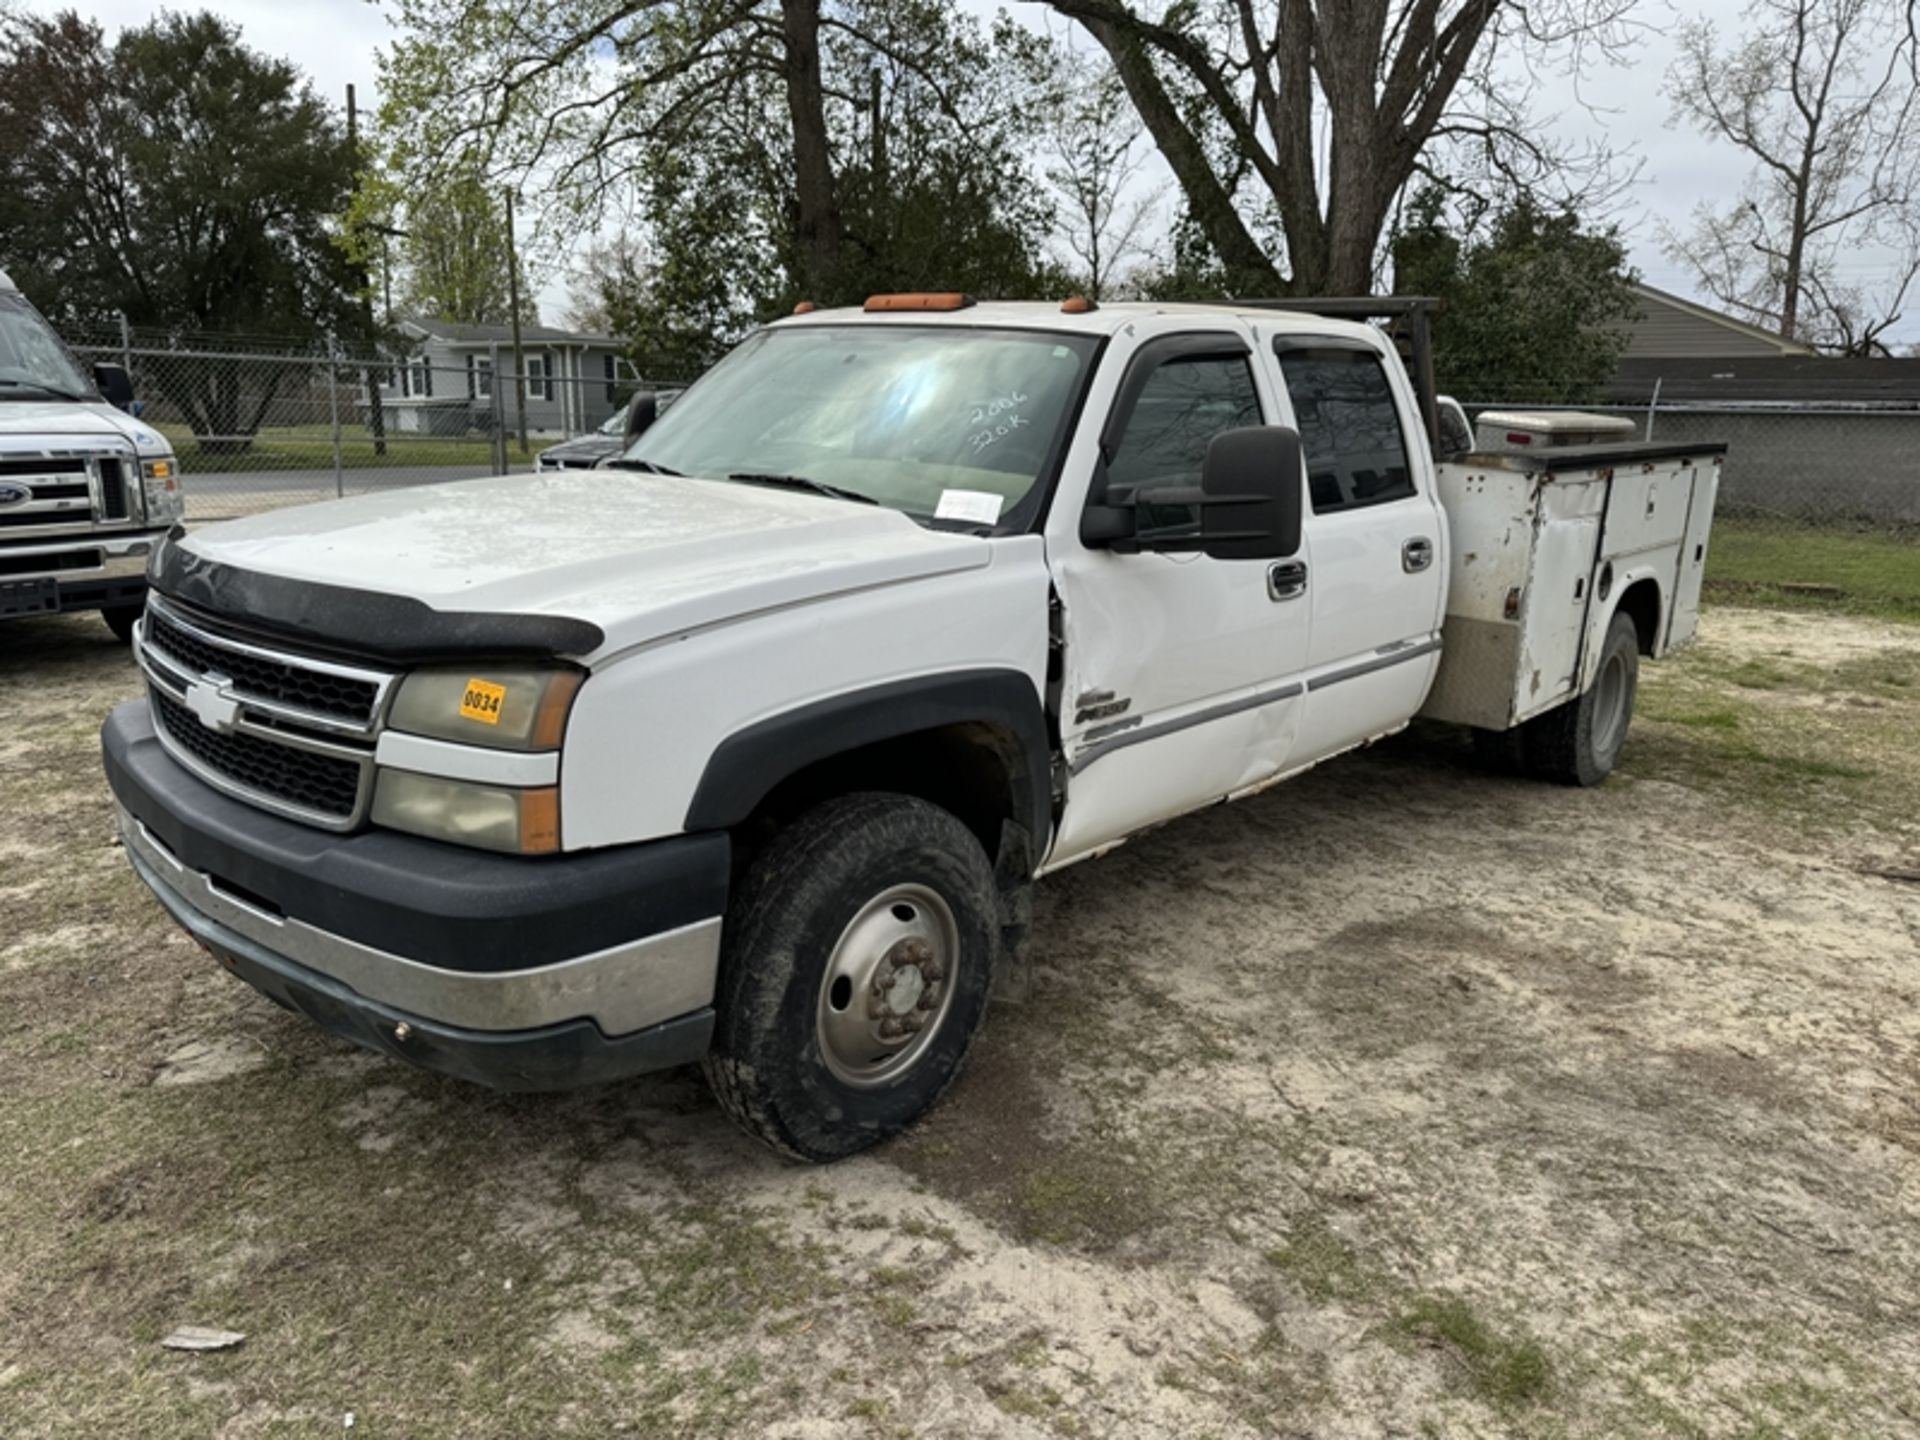 2006 CHEVROLET 3500 dually utility truck with air compressor - 320,838 miles showing -